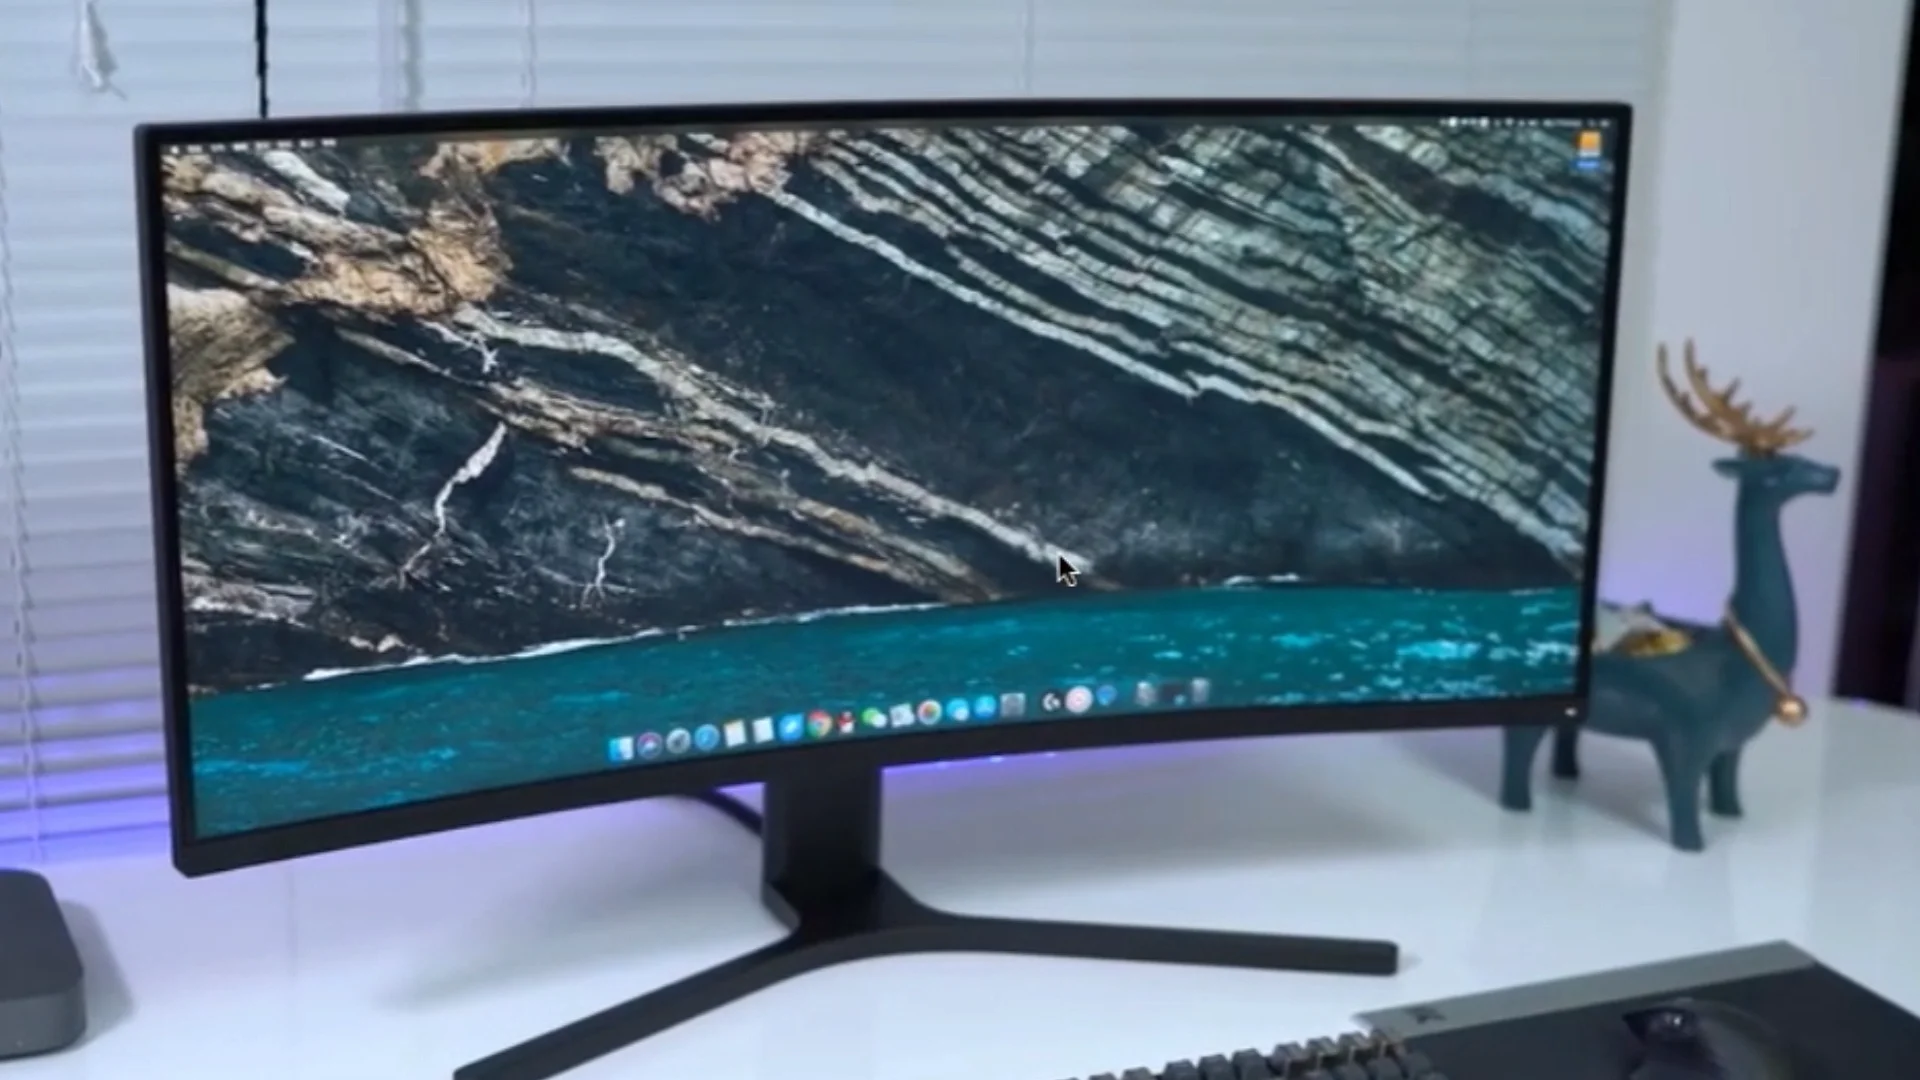 Xiaomi Curved Display